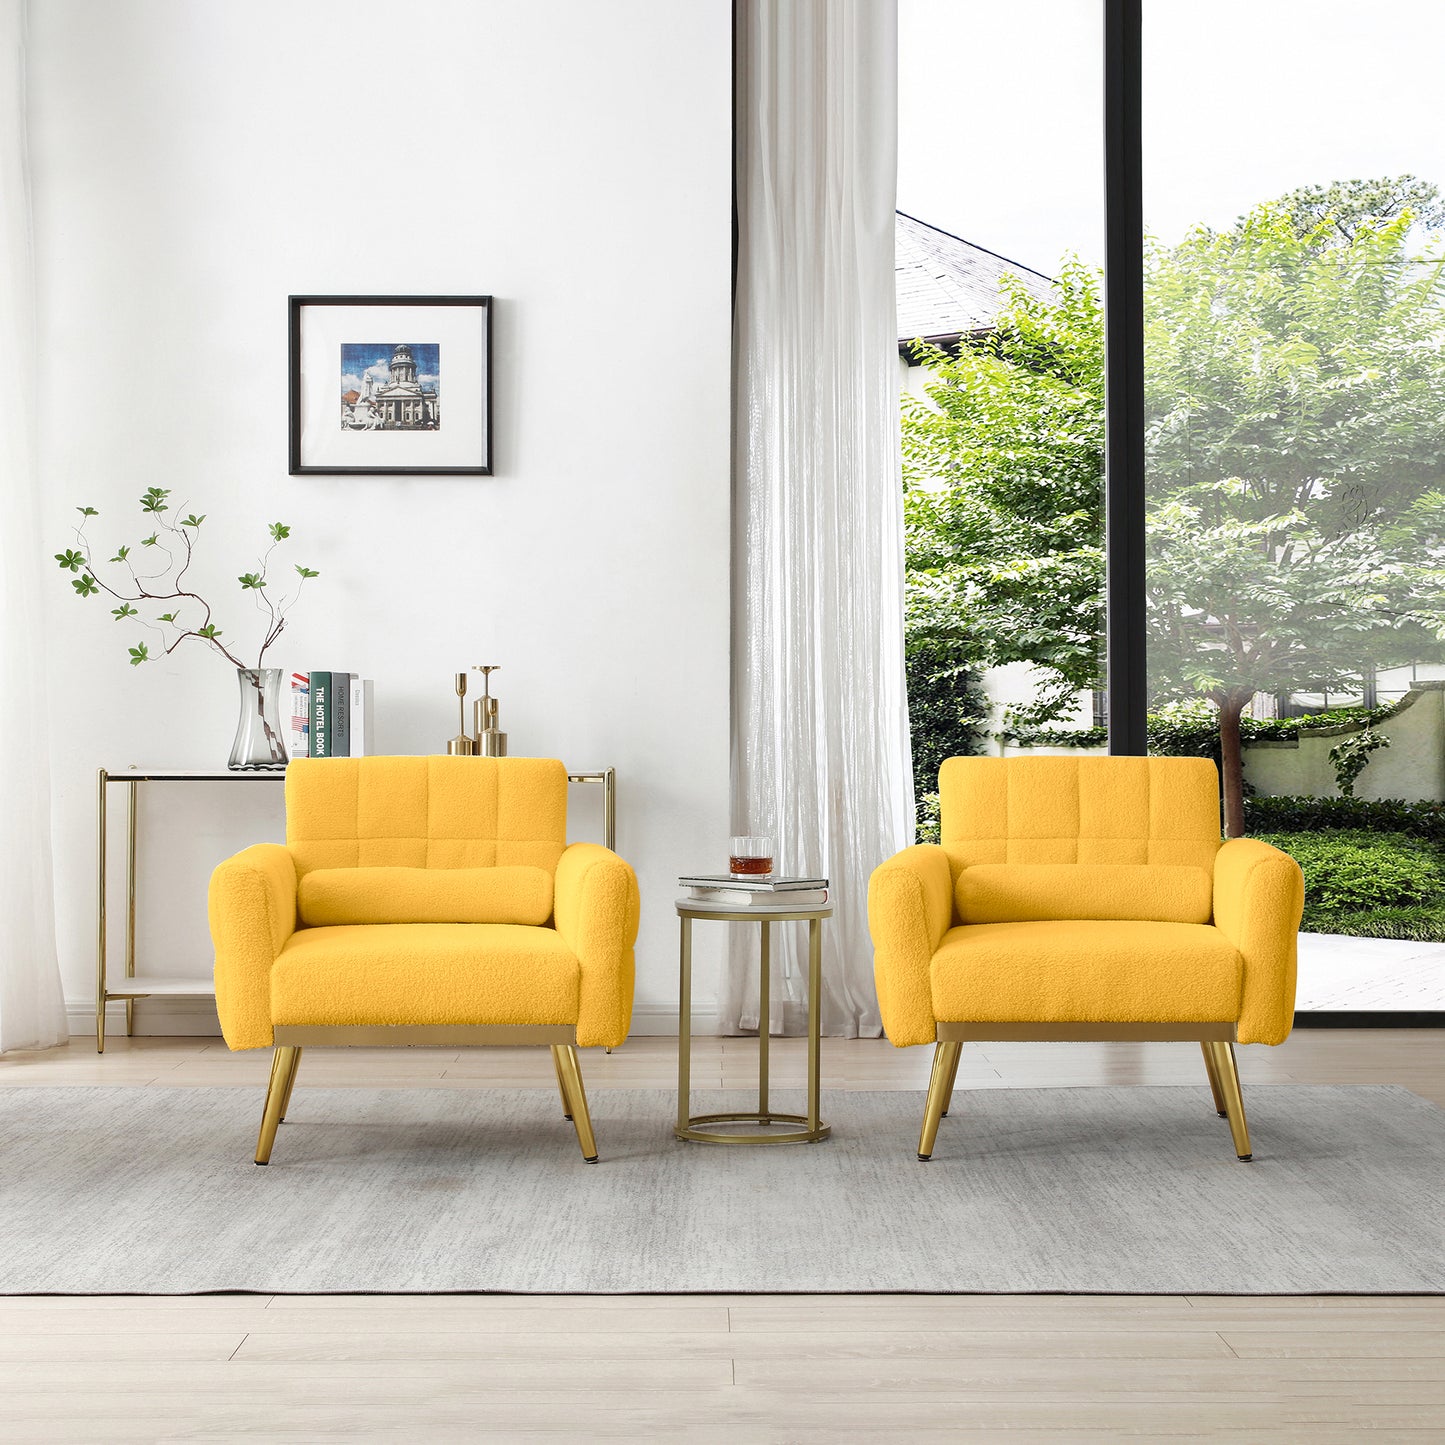 Teddy Accent Chair with Waist Pillow, Modern Upholstered Mid Century Reading Arm Chairs with Metal Legs Comfy Side Lounge Chair Single Sofa for Living Room Bedroom Apartment, Yellow Teddy Fabric. - Enova Luxe Home Store